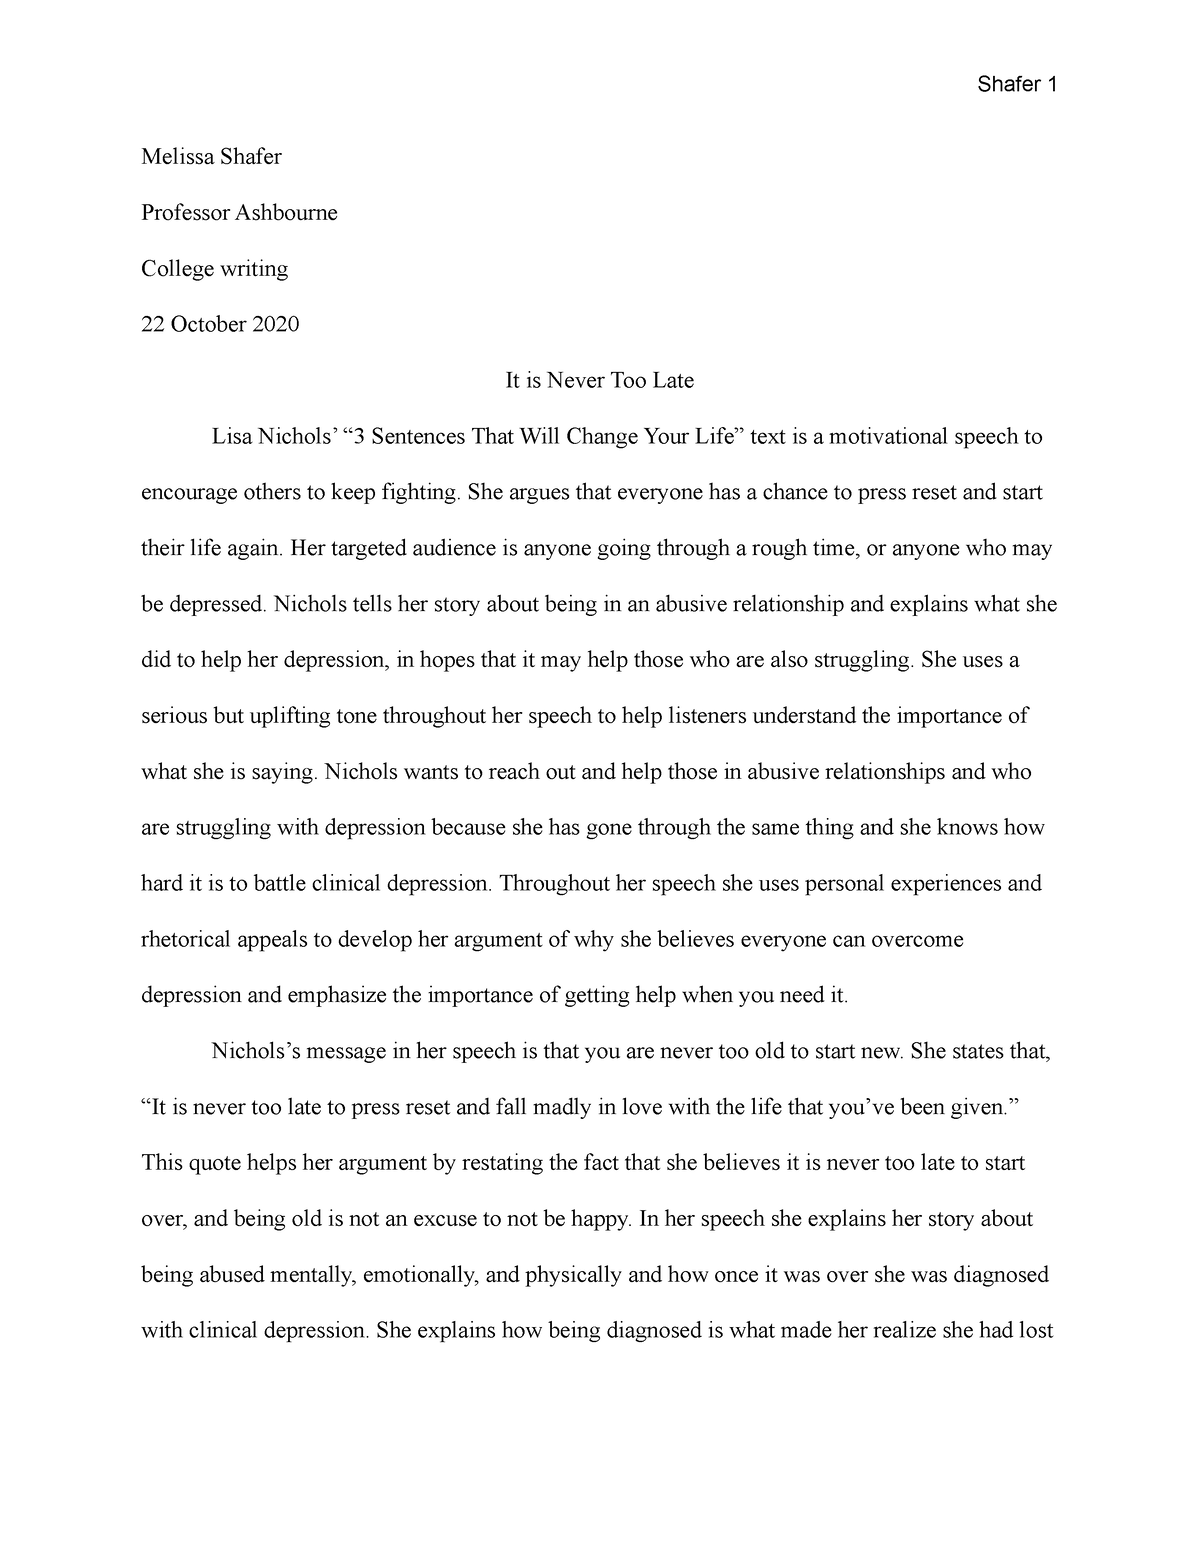 essay about it was too late to hide my mistake